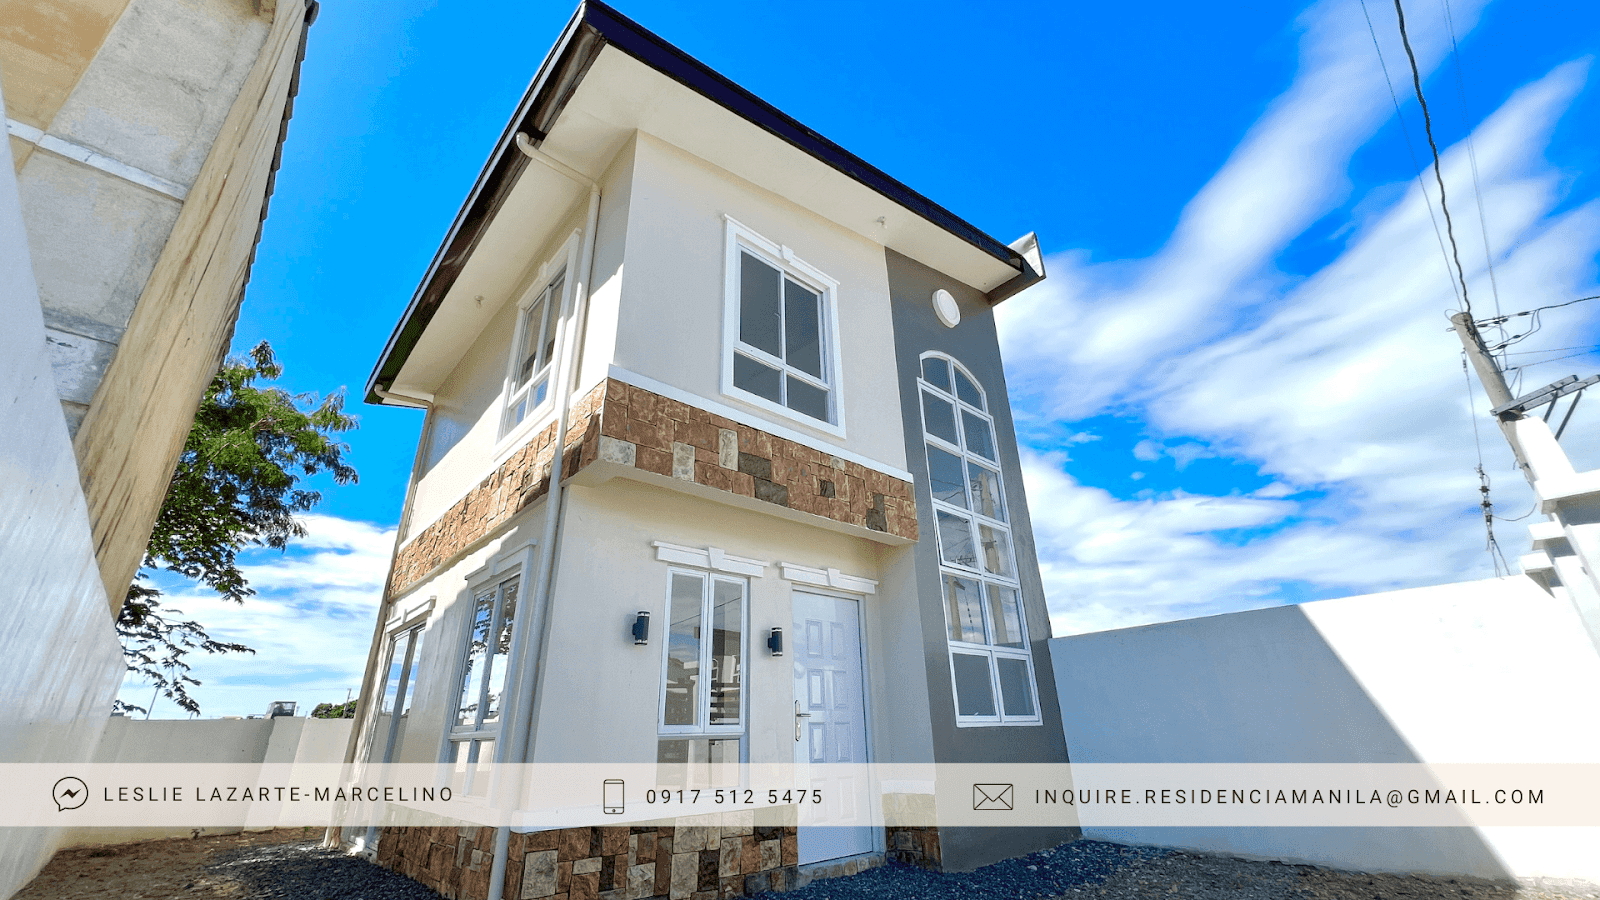 Montefaro Village - Ariana Model | Complete House for Sale with Fence and Gate Imus Cavite | Breighton Land Inc. (subsidiary of Profriends Inc.)